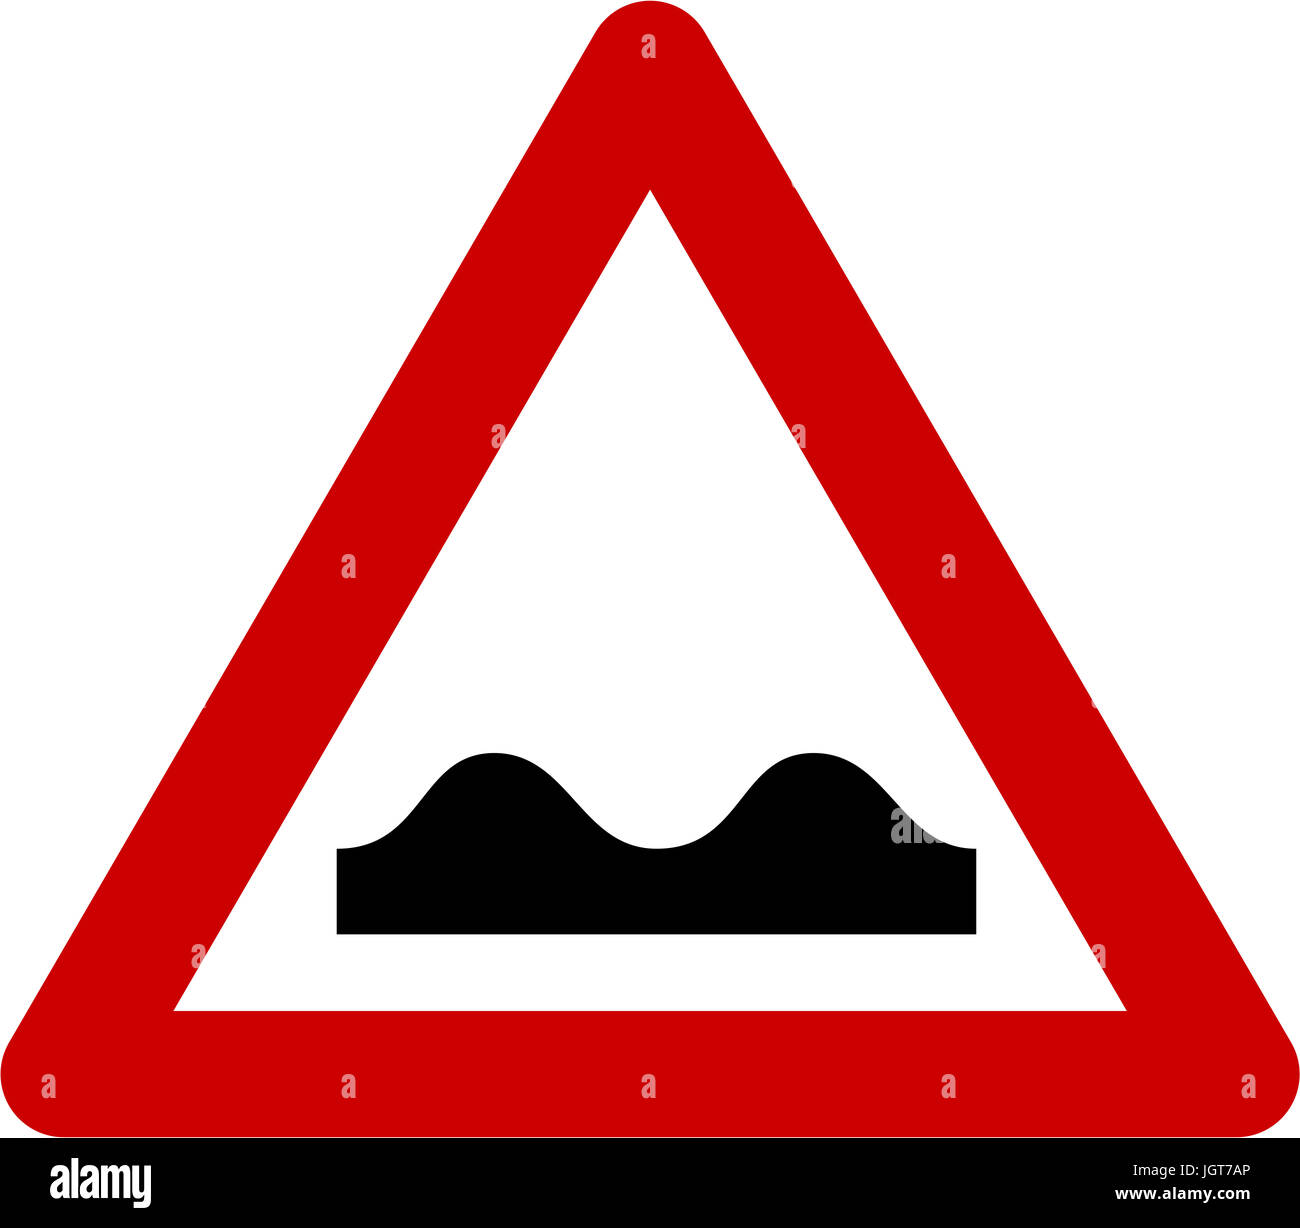 Warning sign with road bumps symbol Stock Photo